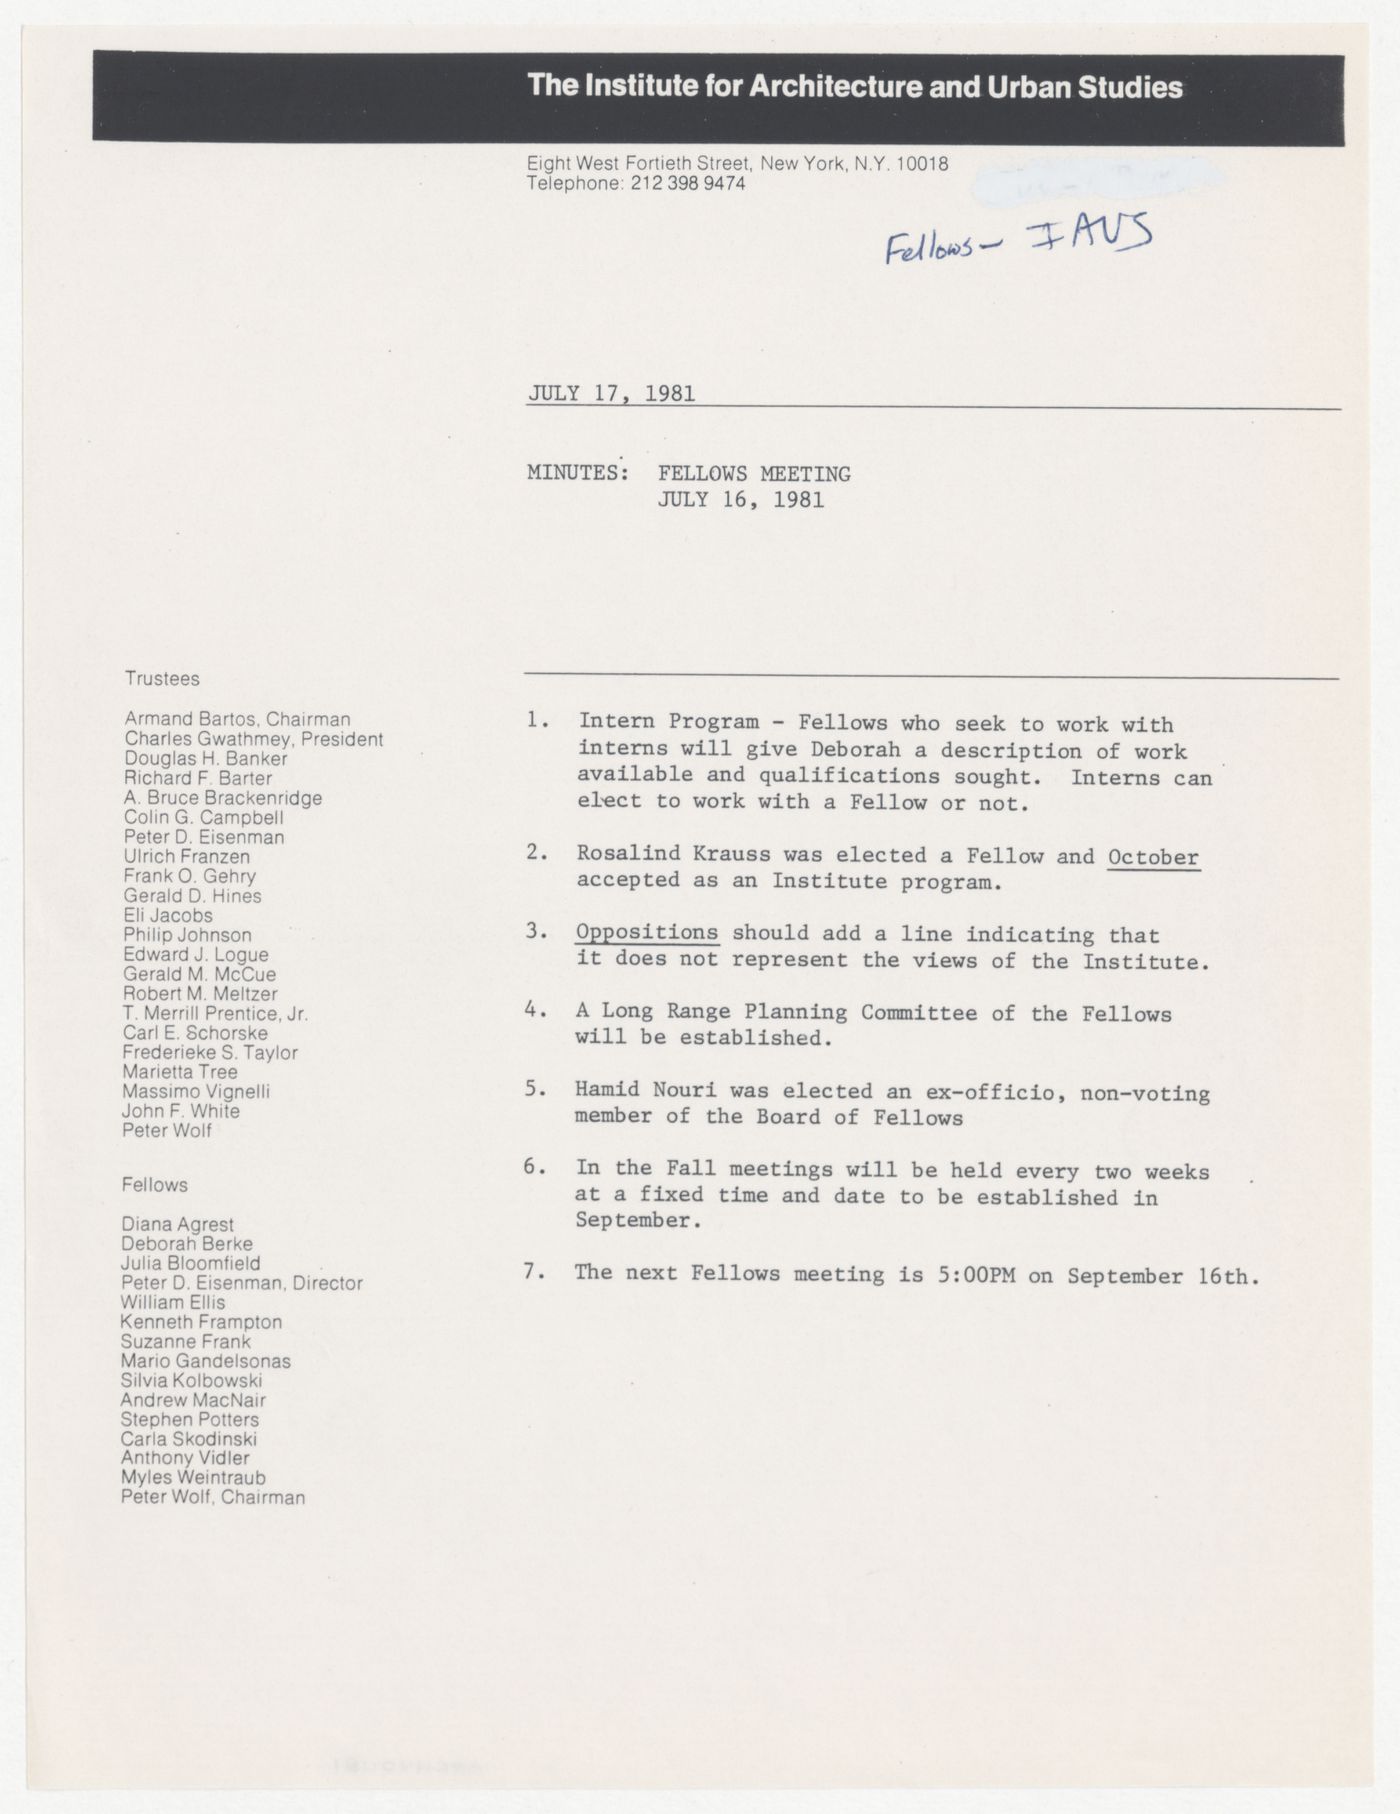 Minutes of meeting of the Fellows on July 16th, 1981